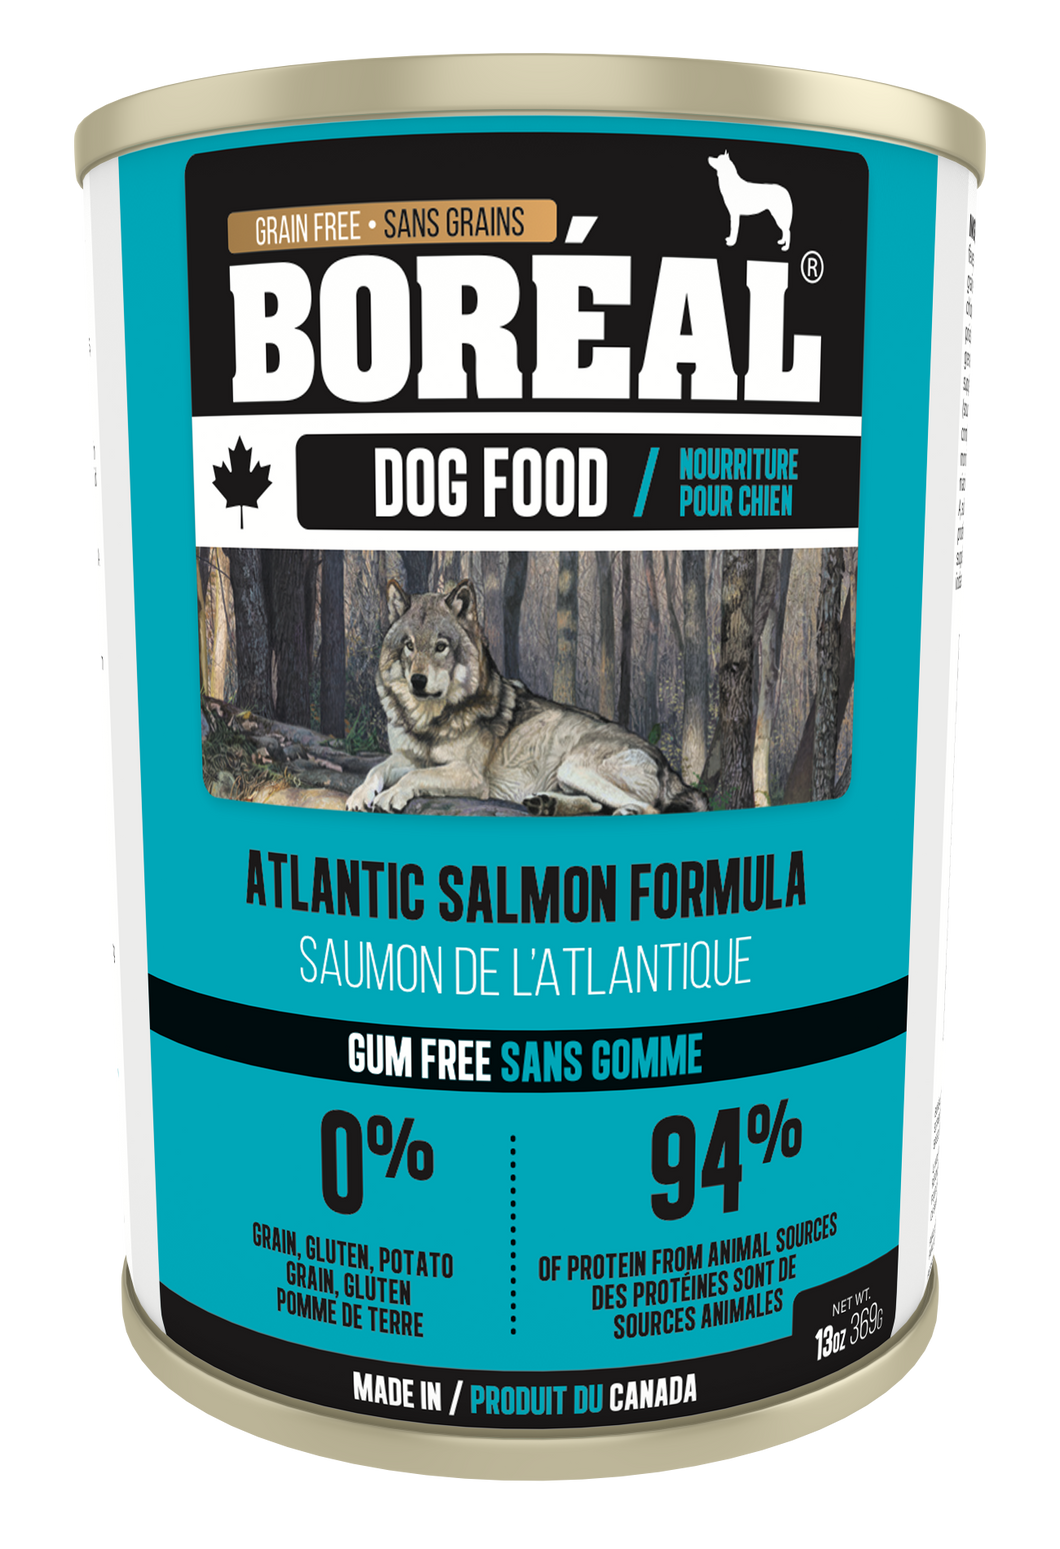 Boréal - Canadian Atlantic Salmon - Dog Food - Gum Free - Complete Diet - All Breed All Lifestage - Healthy Joint Support - Potato Free - Atlantic Salmon - Made in Canada 